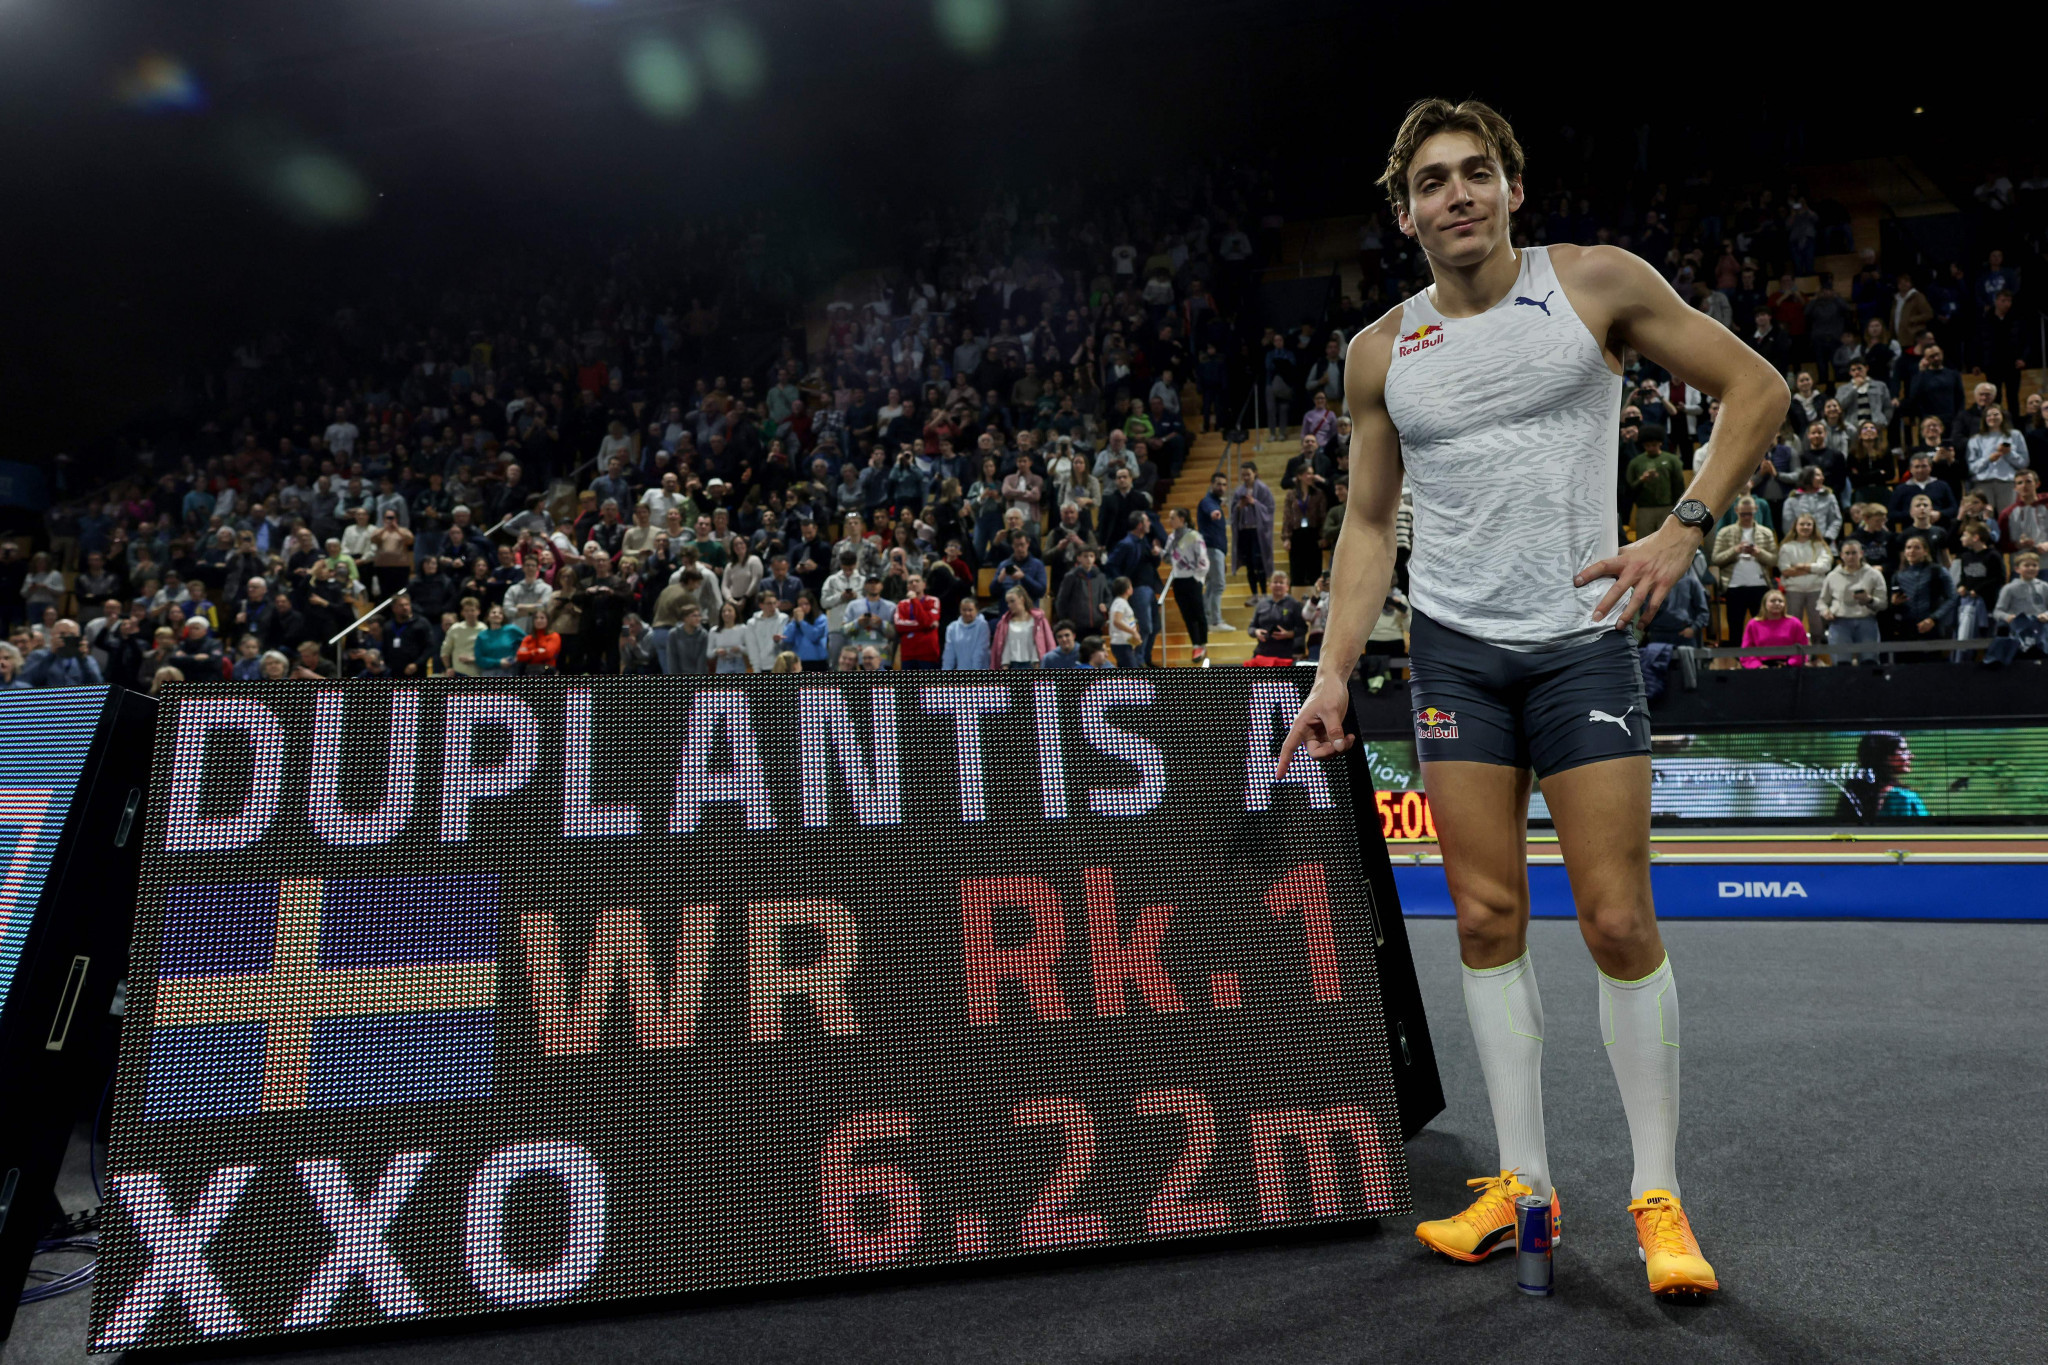 Duplantis raises his world pole vault record to 6.22m in Lavillenie's meeting at Clermont-Ferrand